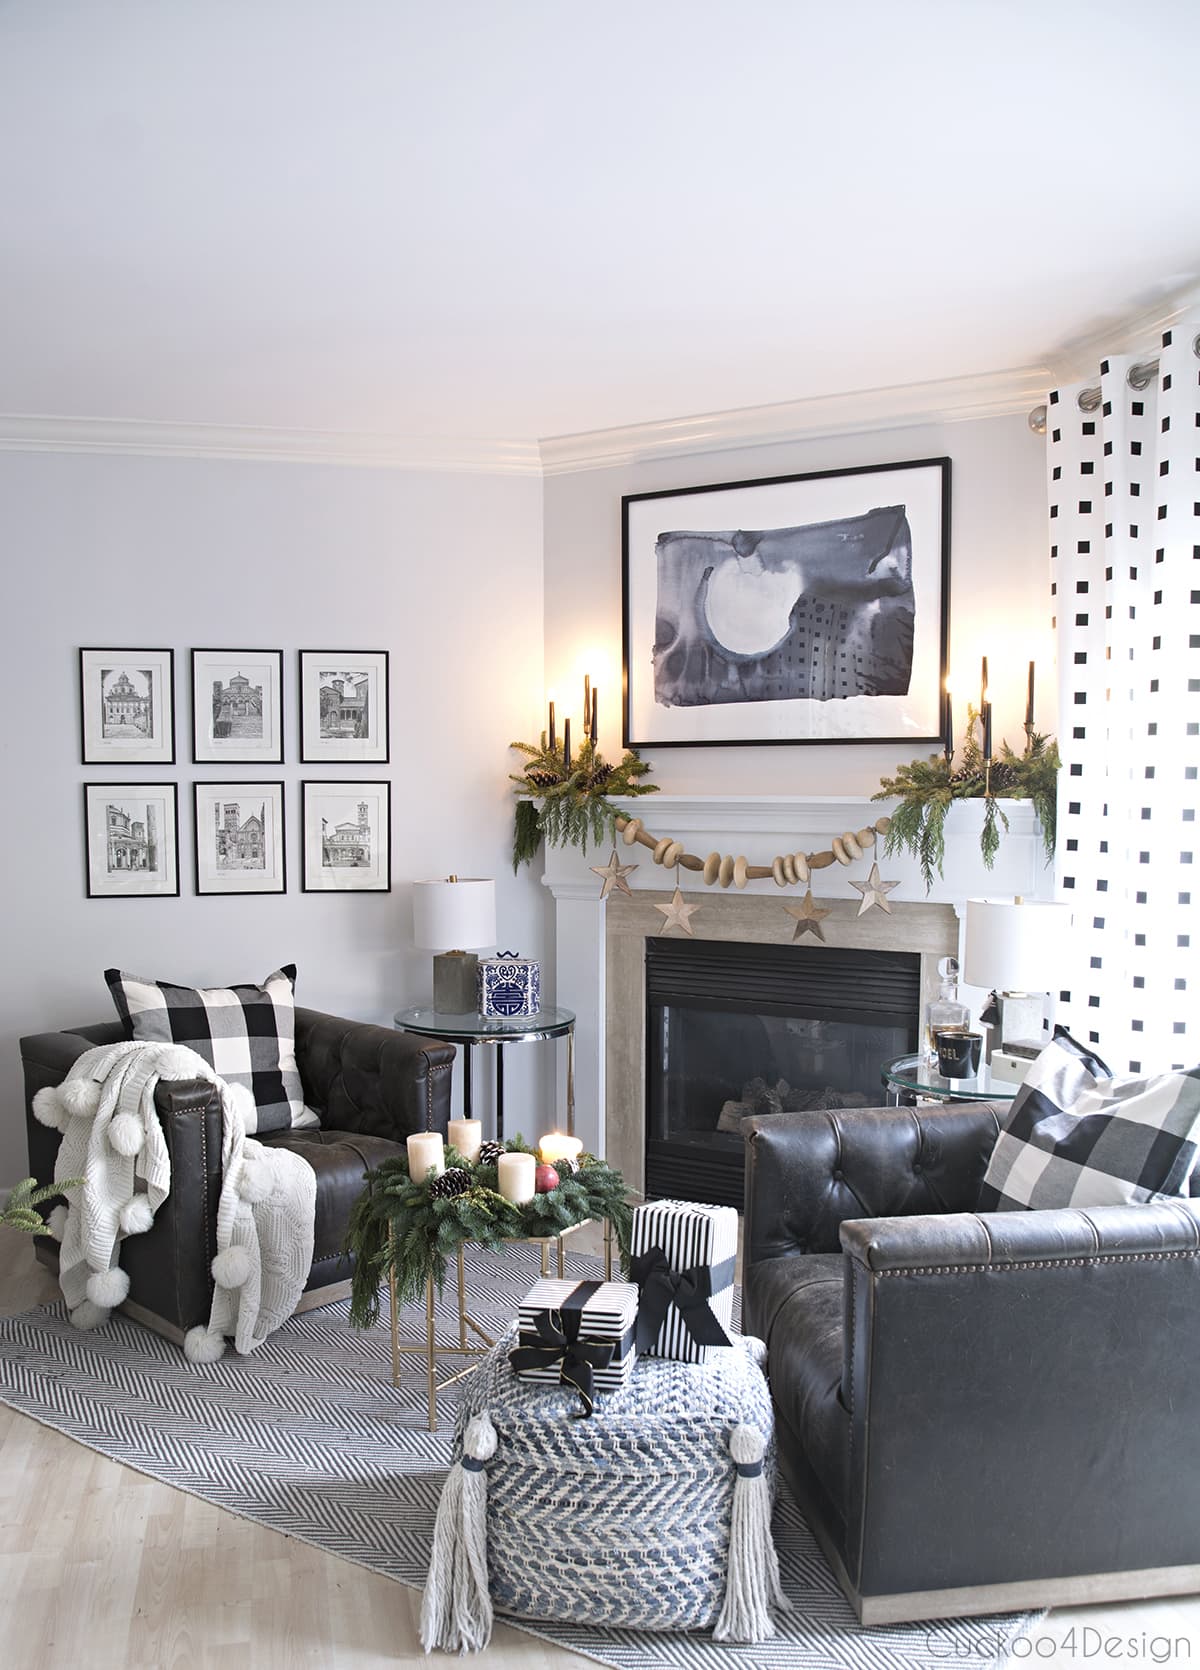 blue, black and white fireplace area with leather swivel chair and natural Christmas decor